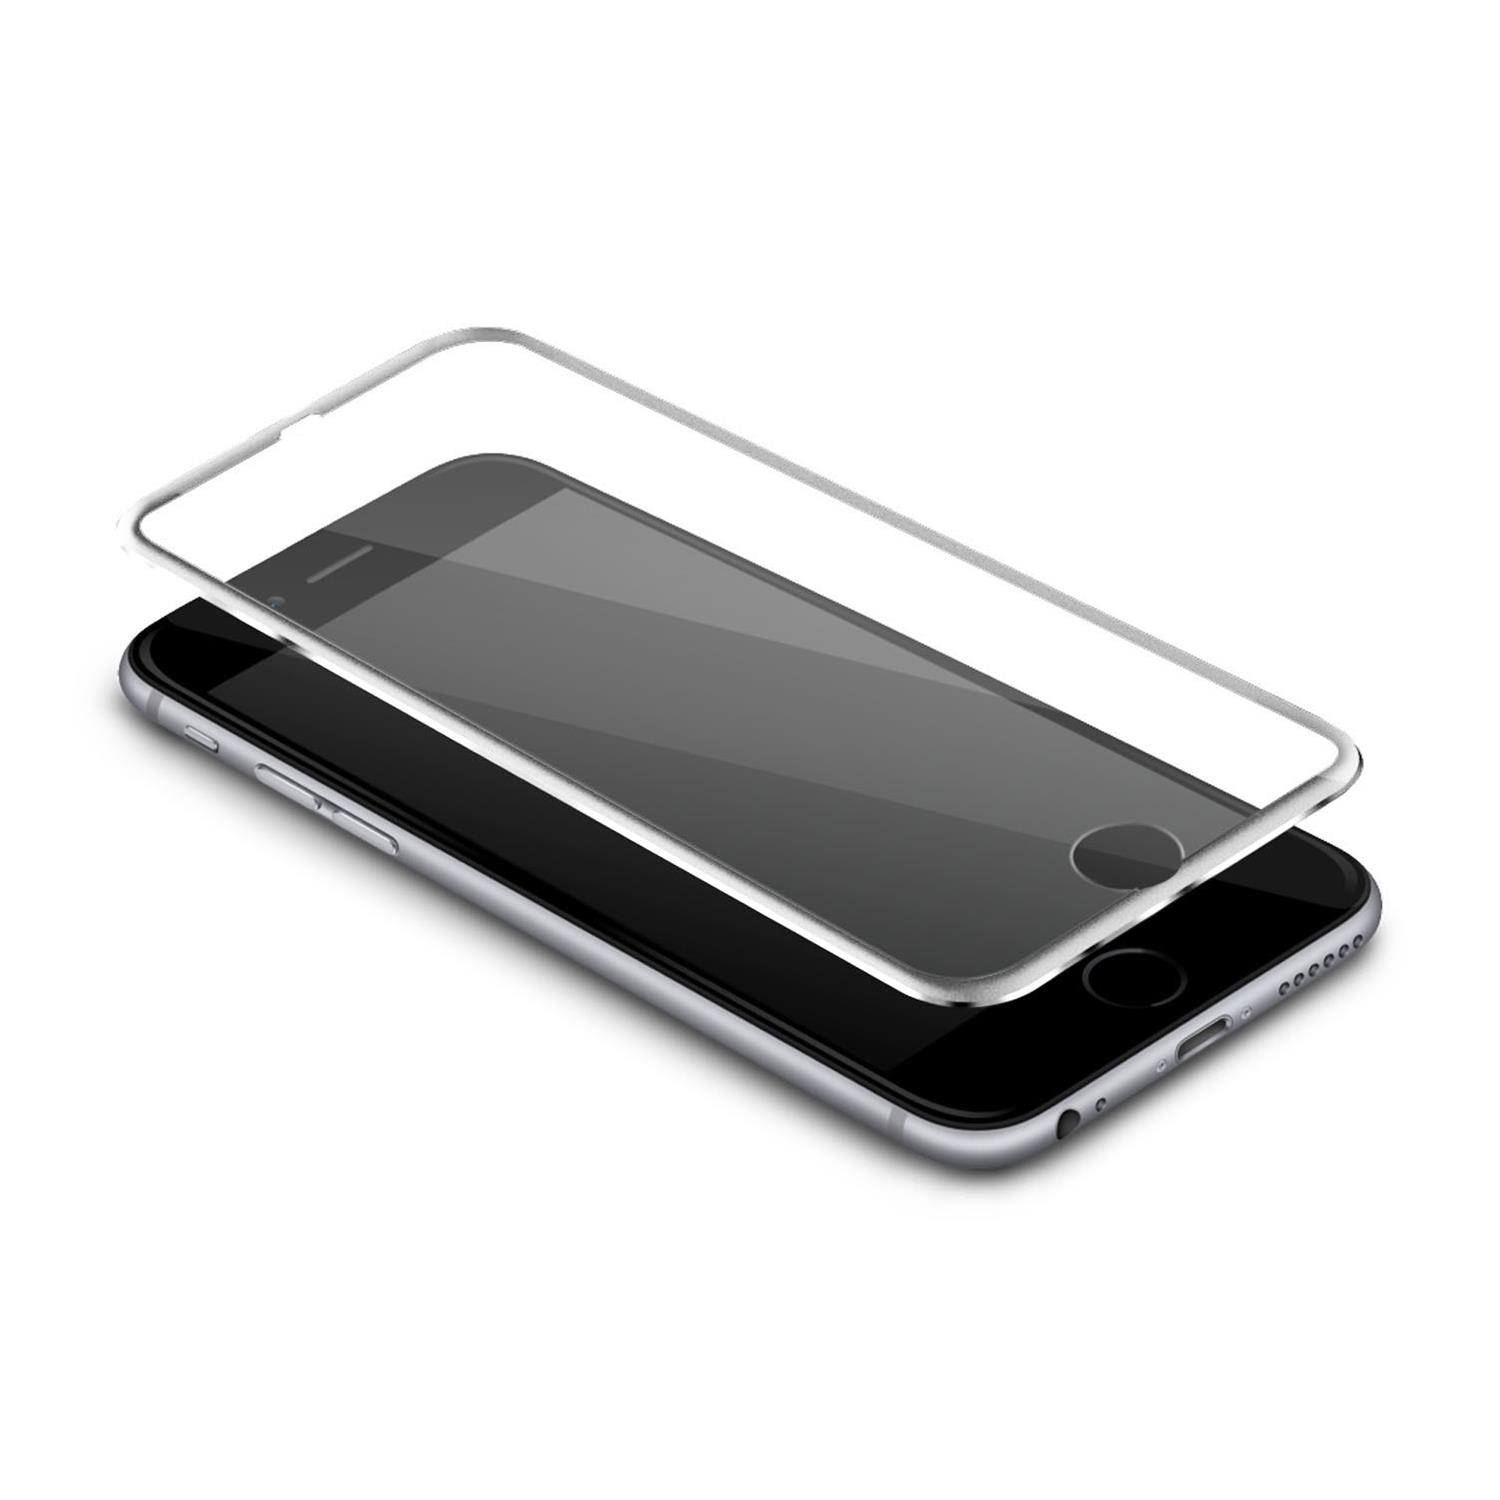 Exian iPhone 6 Plus/6s Plus Tempered Glass Screen Protector with Metallic Edge Silver